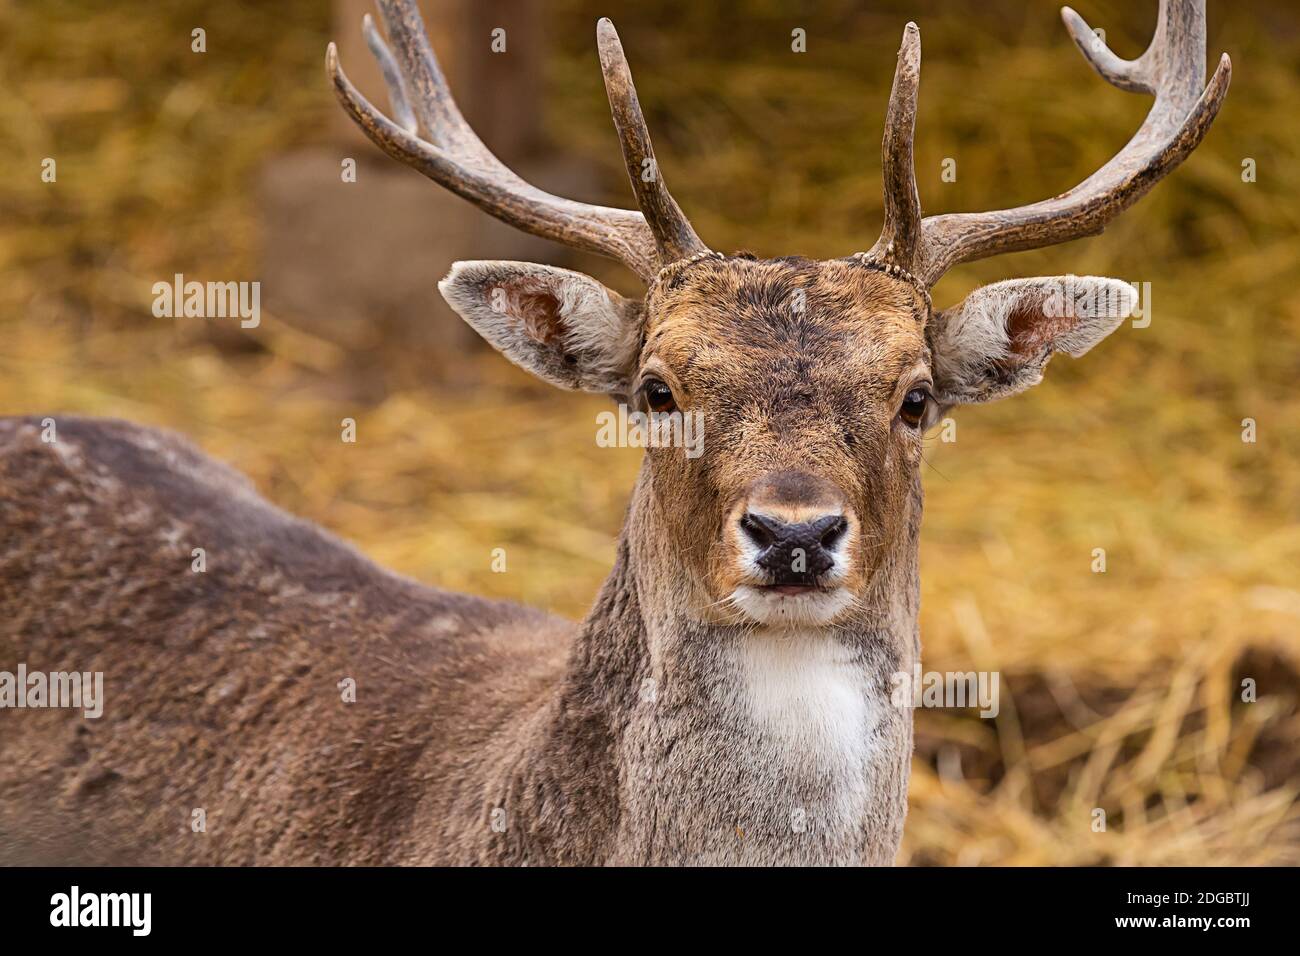 Deer brown noble animal portrait horned wild close-up cute Stock Photo